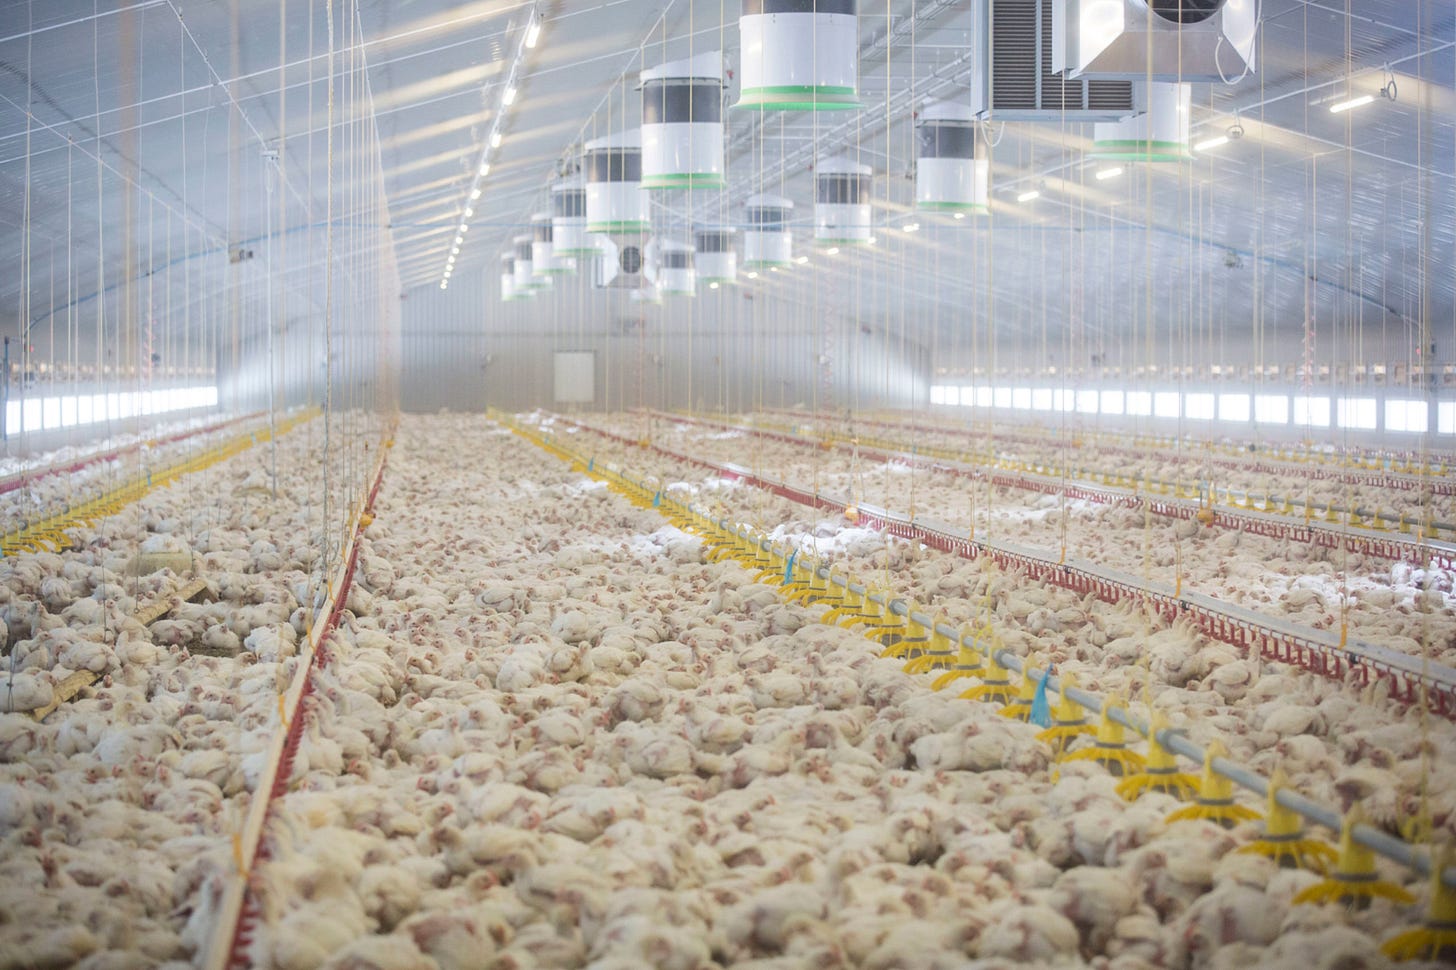 UK factory farm for chickens